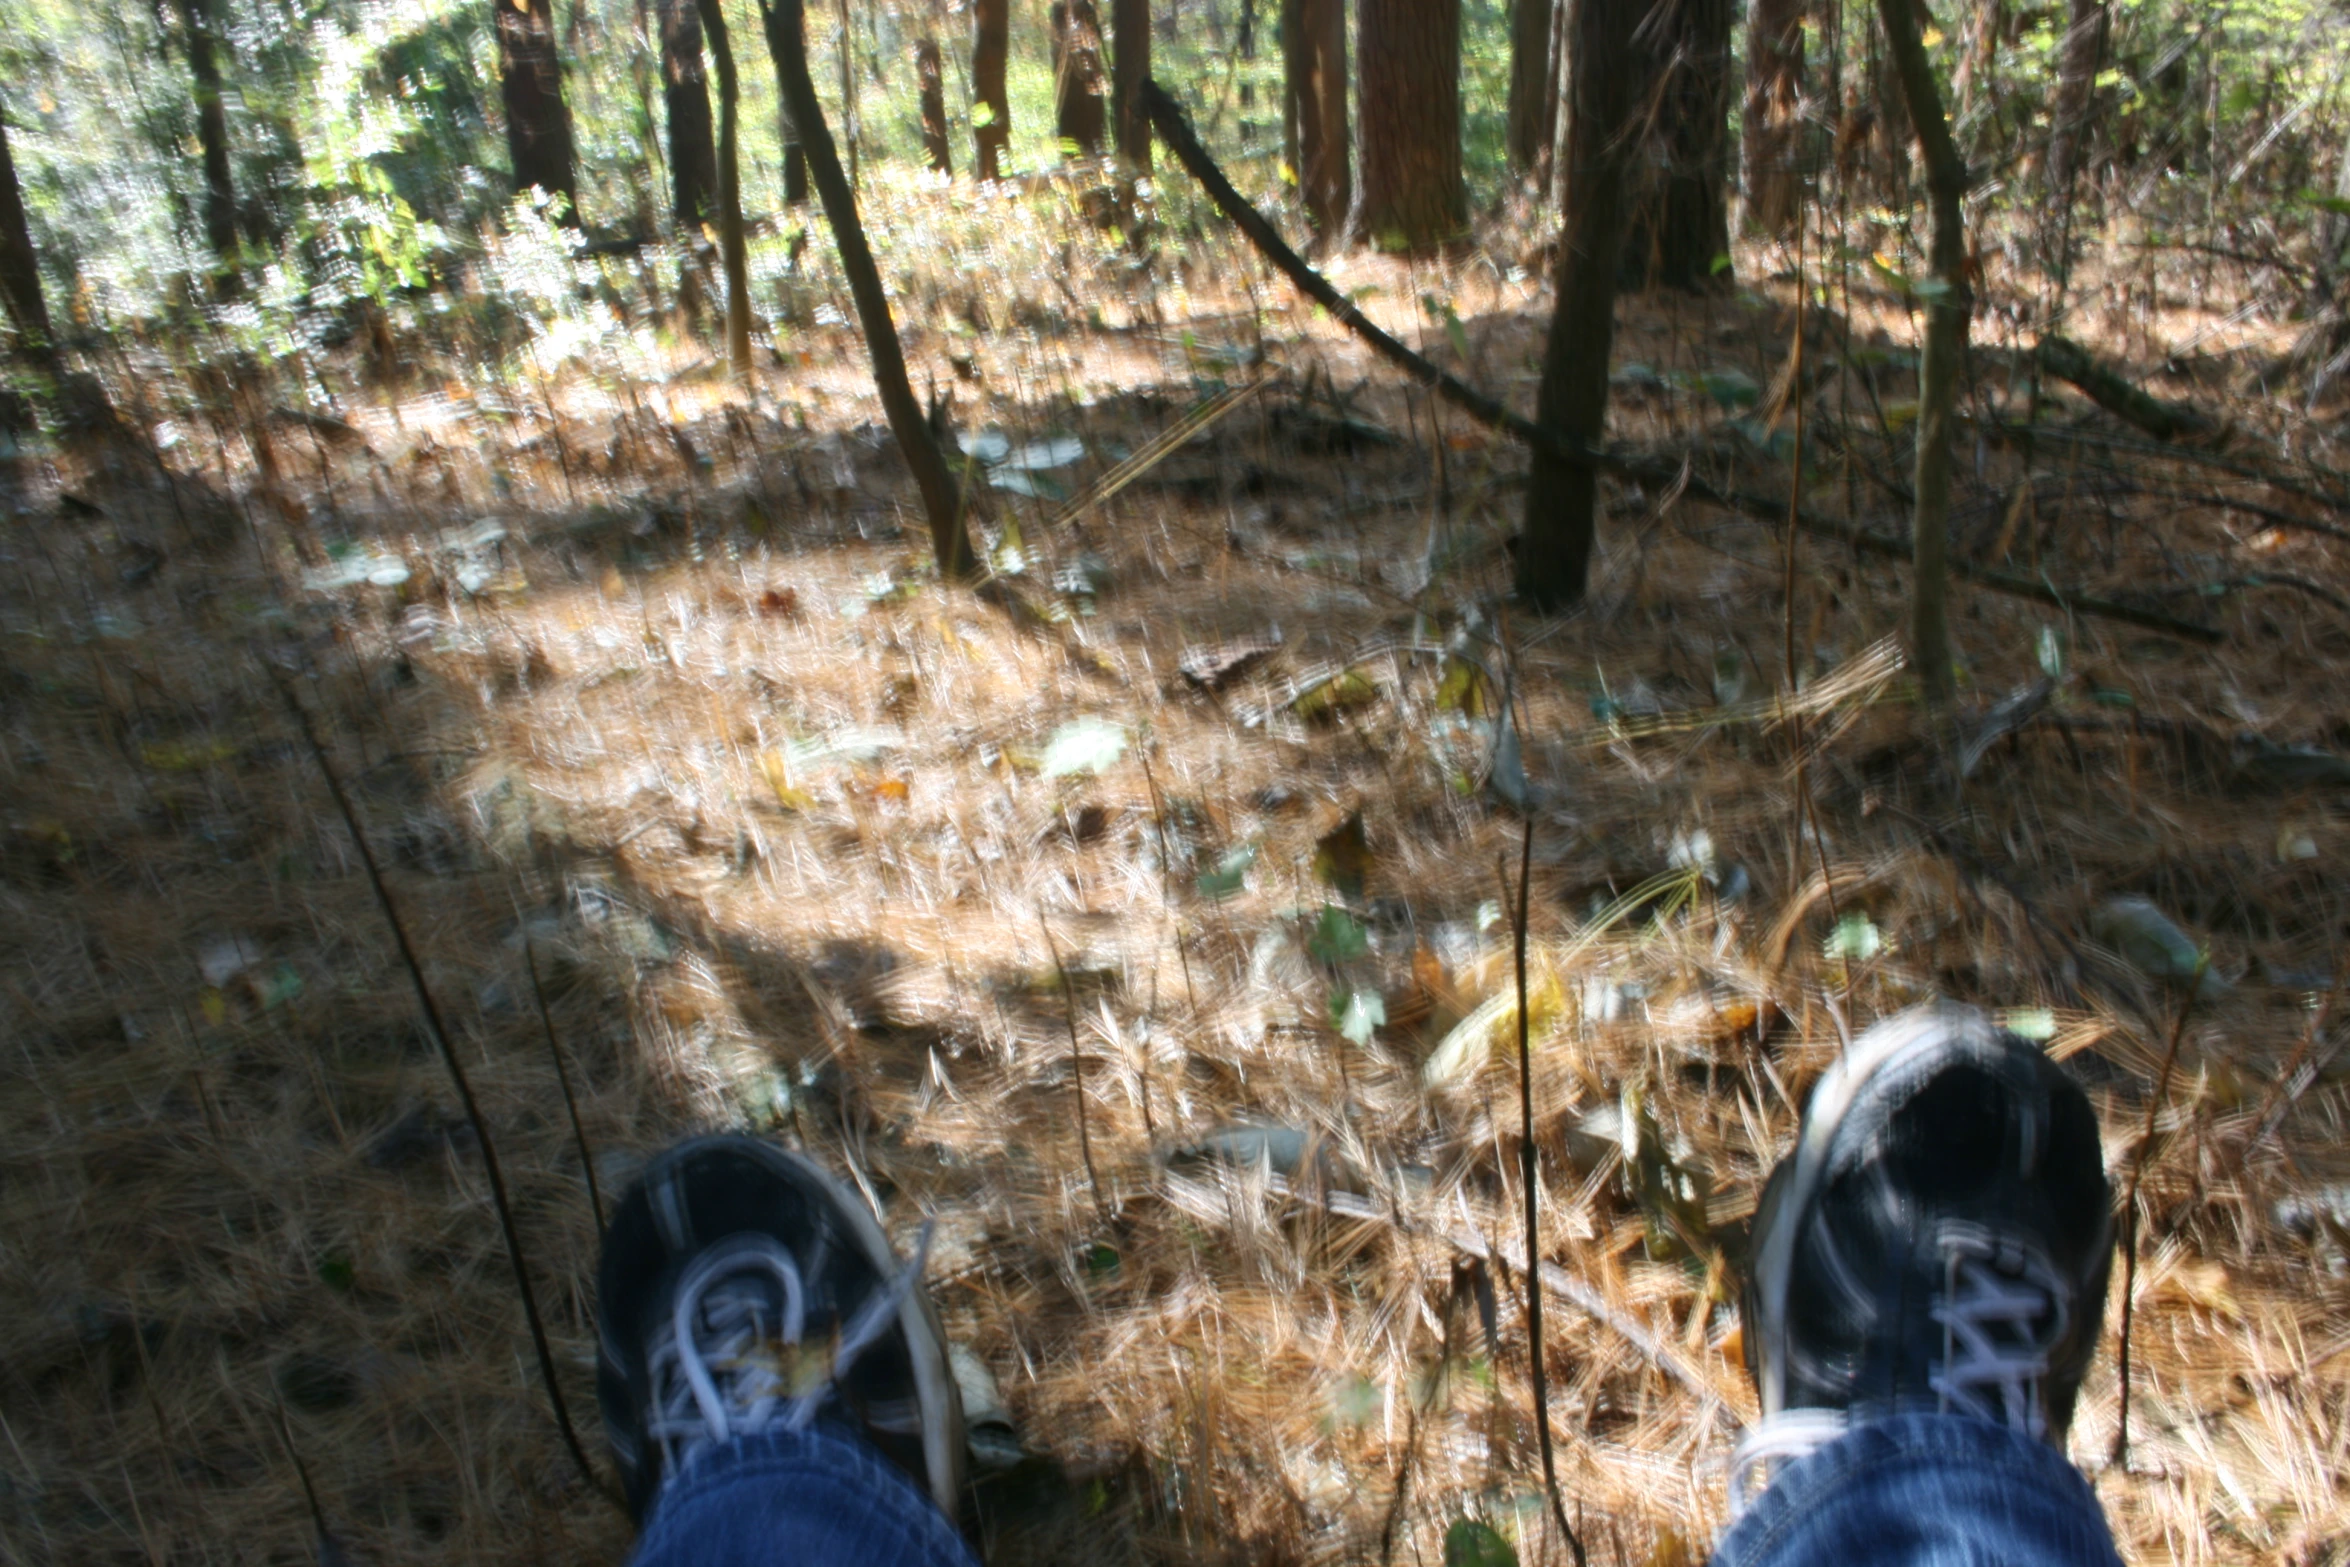 the feet of a person in black and white sneakers standing on a path near trees